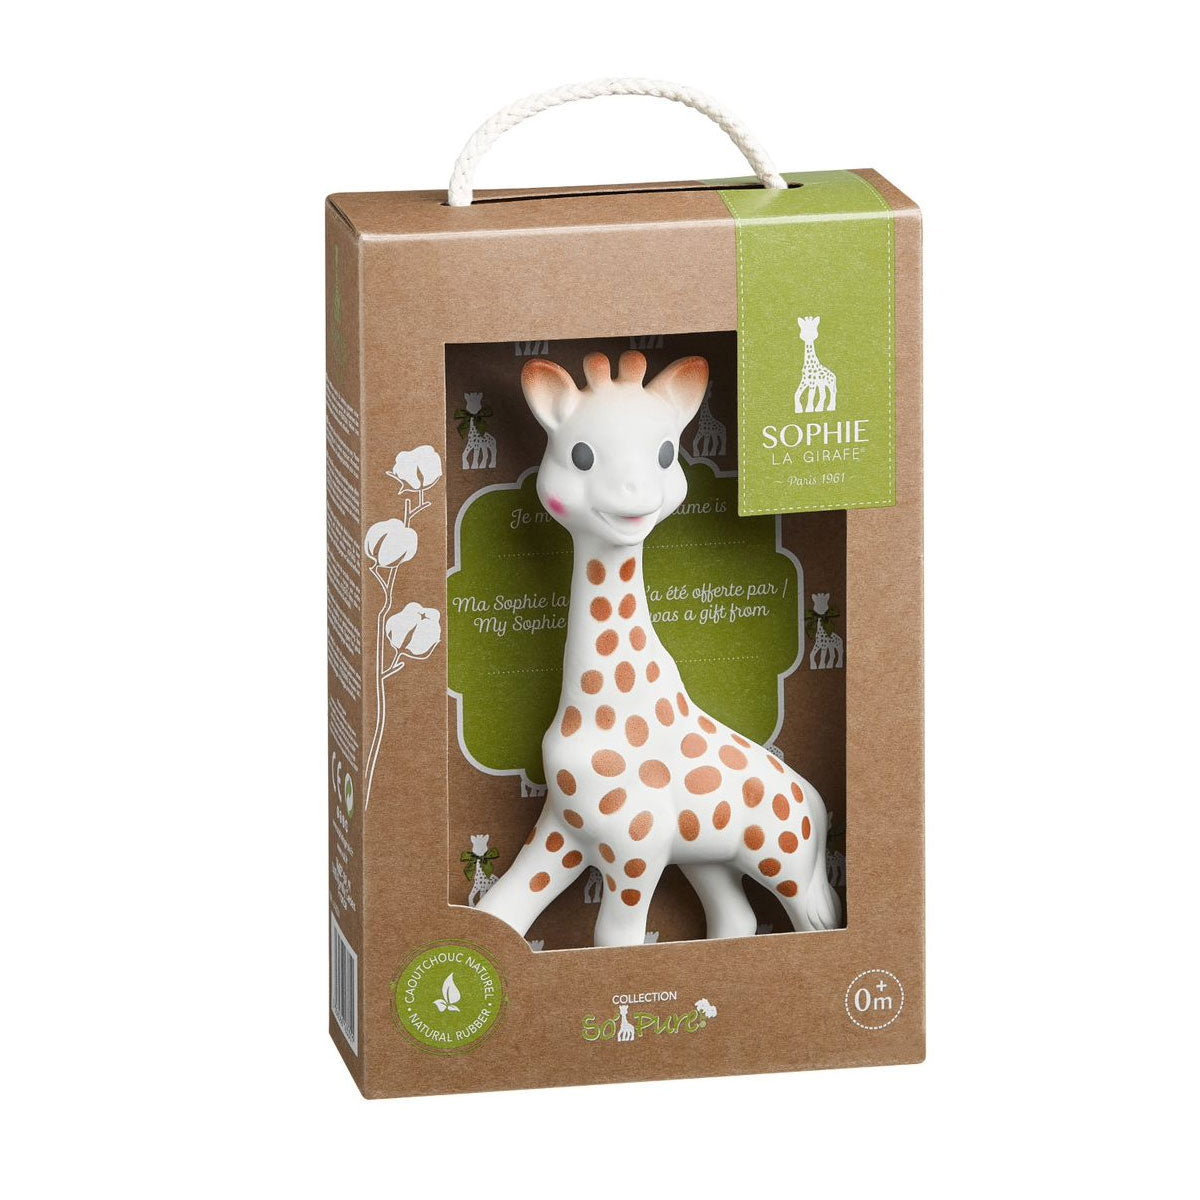 100% natural rubber.teether toy.. Original Sophie La Girafe presented in attractive gift box.